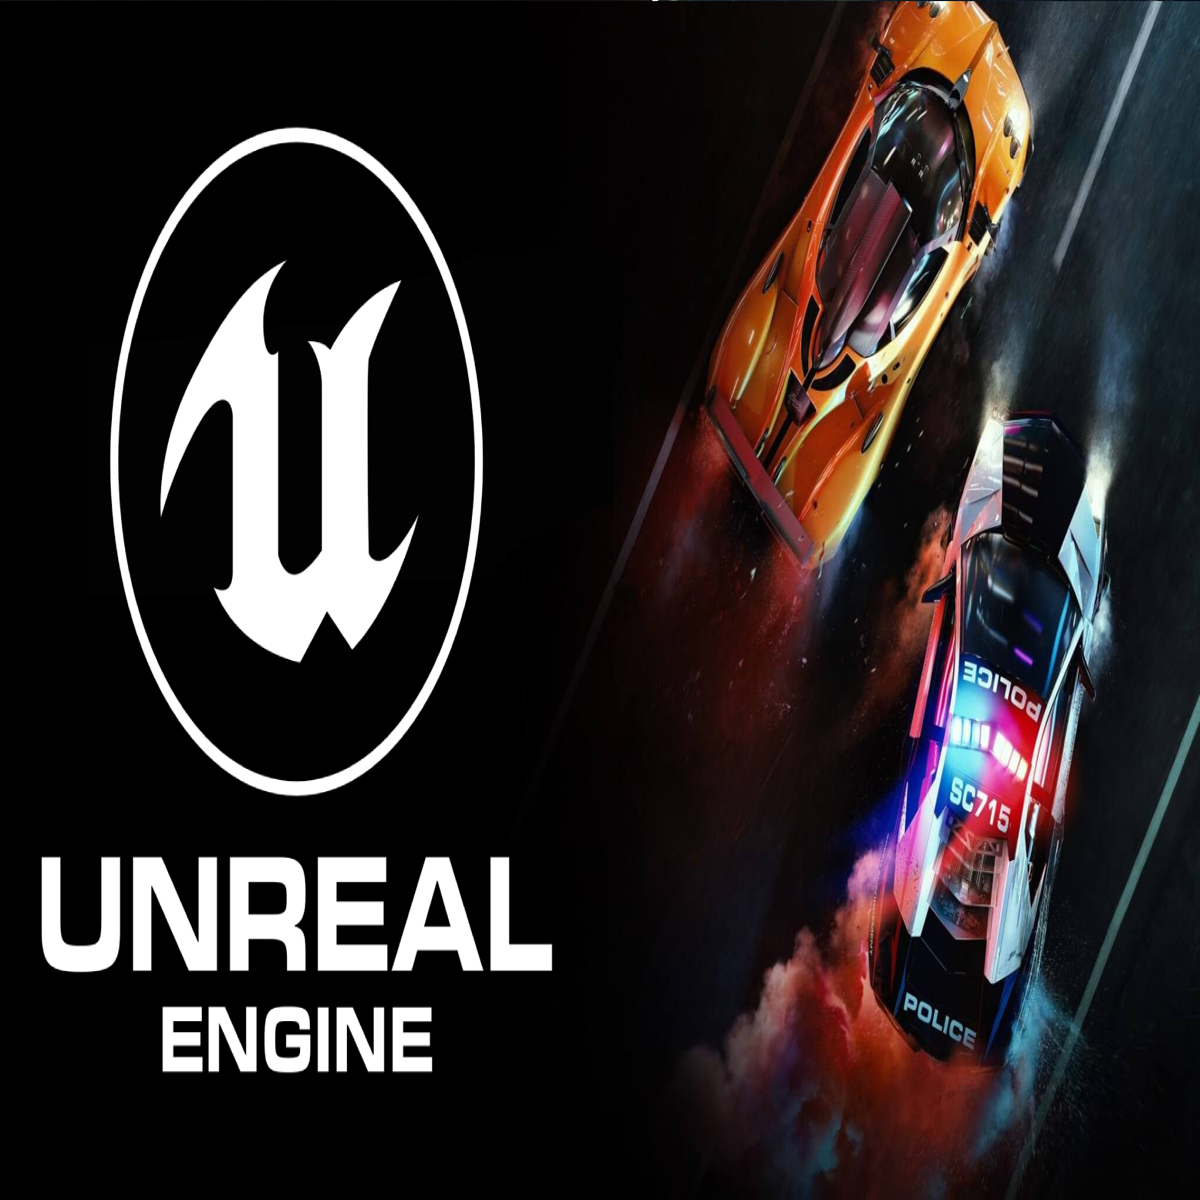 Need for Speed Most Wanted Remake - Unreal Engine 5 Amazing Showcase l  Concept Trailer 